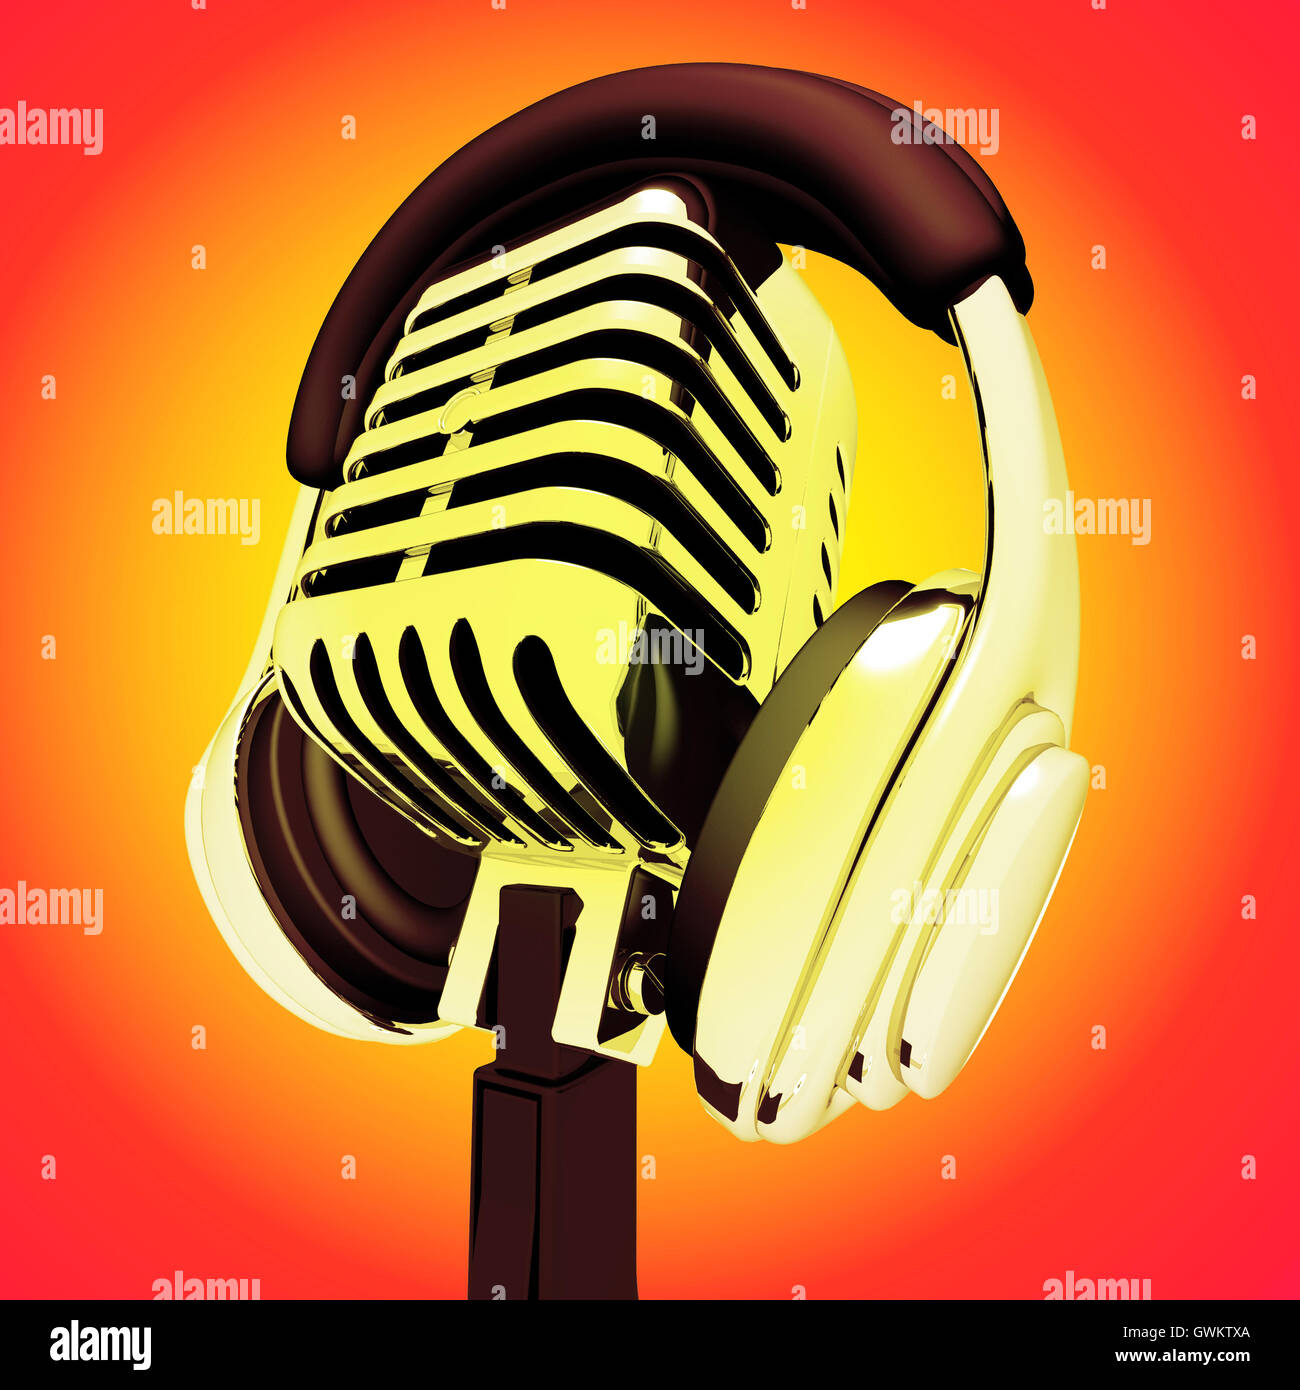 Microphone And Headphones Shows Recording Studio Or Performing Stock Photo